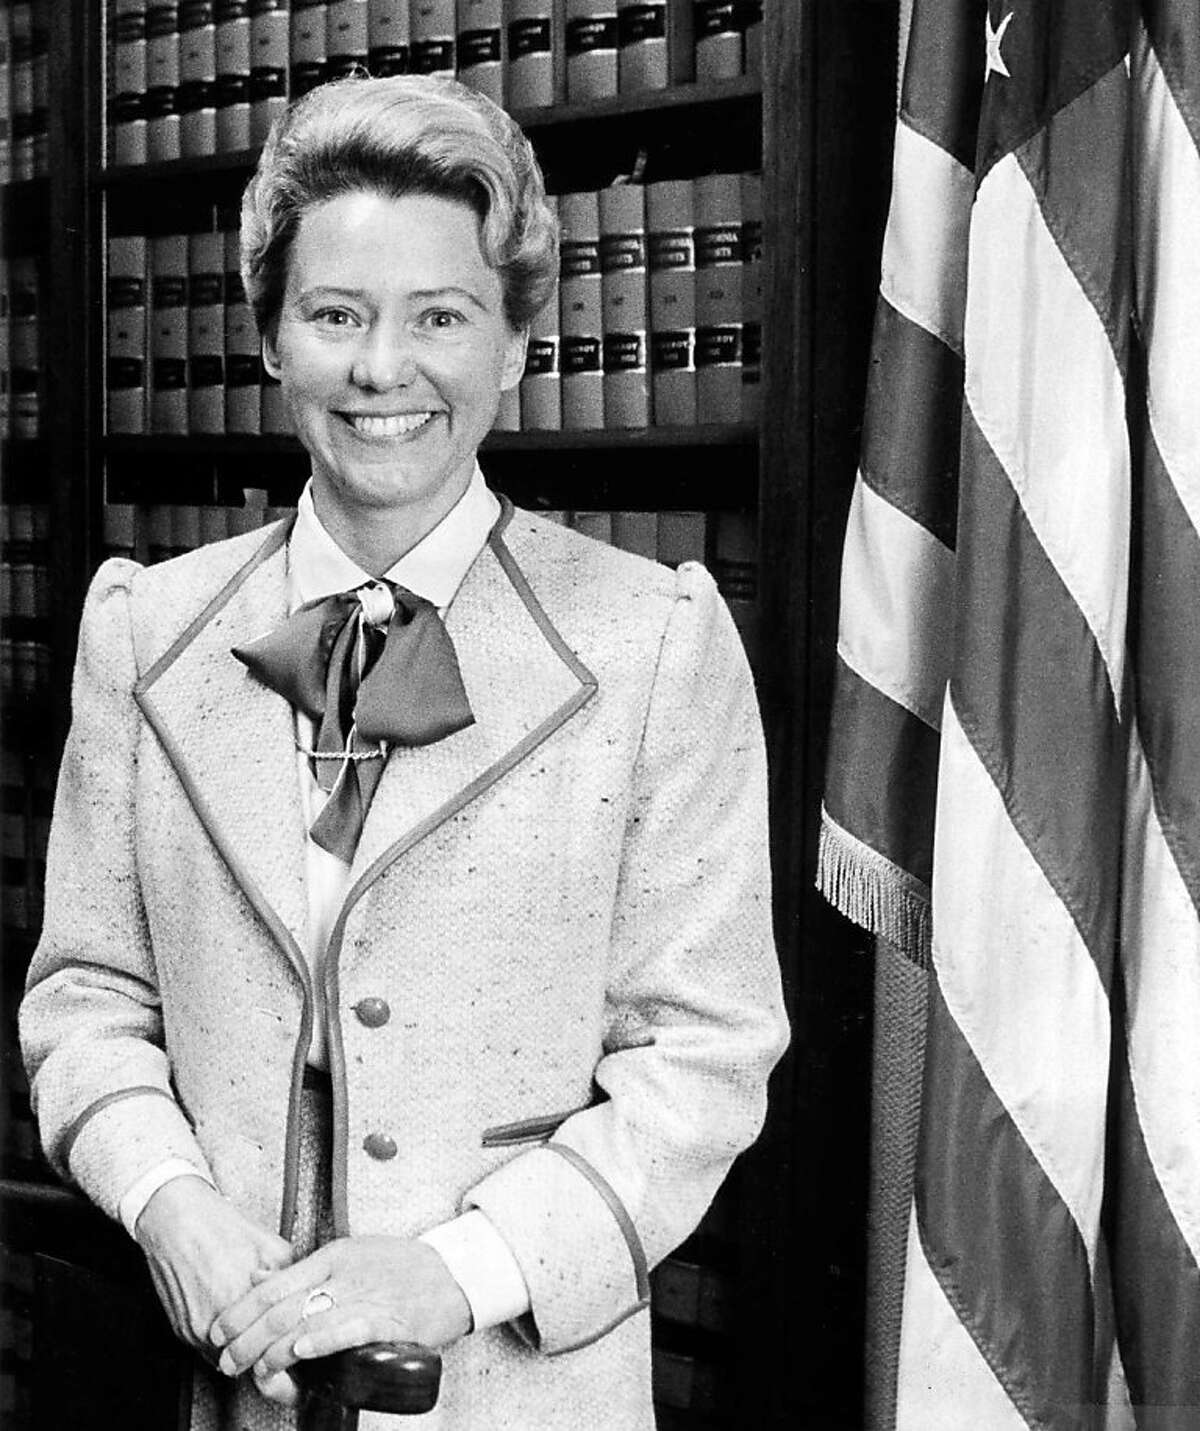 Judge Pamela Ann Rymer, in a 1986 file photo, who filled the seat vacated by Judge Anthony Kennedy on the U.S. Court of Appeals for the 9th Circuit in 1989 after he was named to the U.S. Supreme Court and who was highly respected for her sharp legal mind, productivity and dedication, has died. She was 70. (Los Angeles Times/MCT)